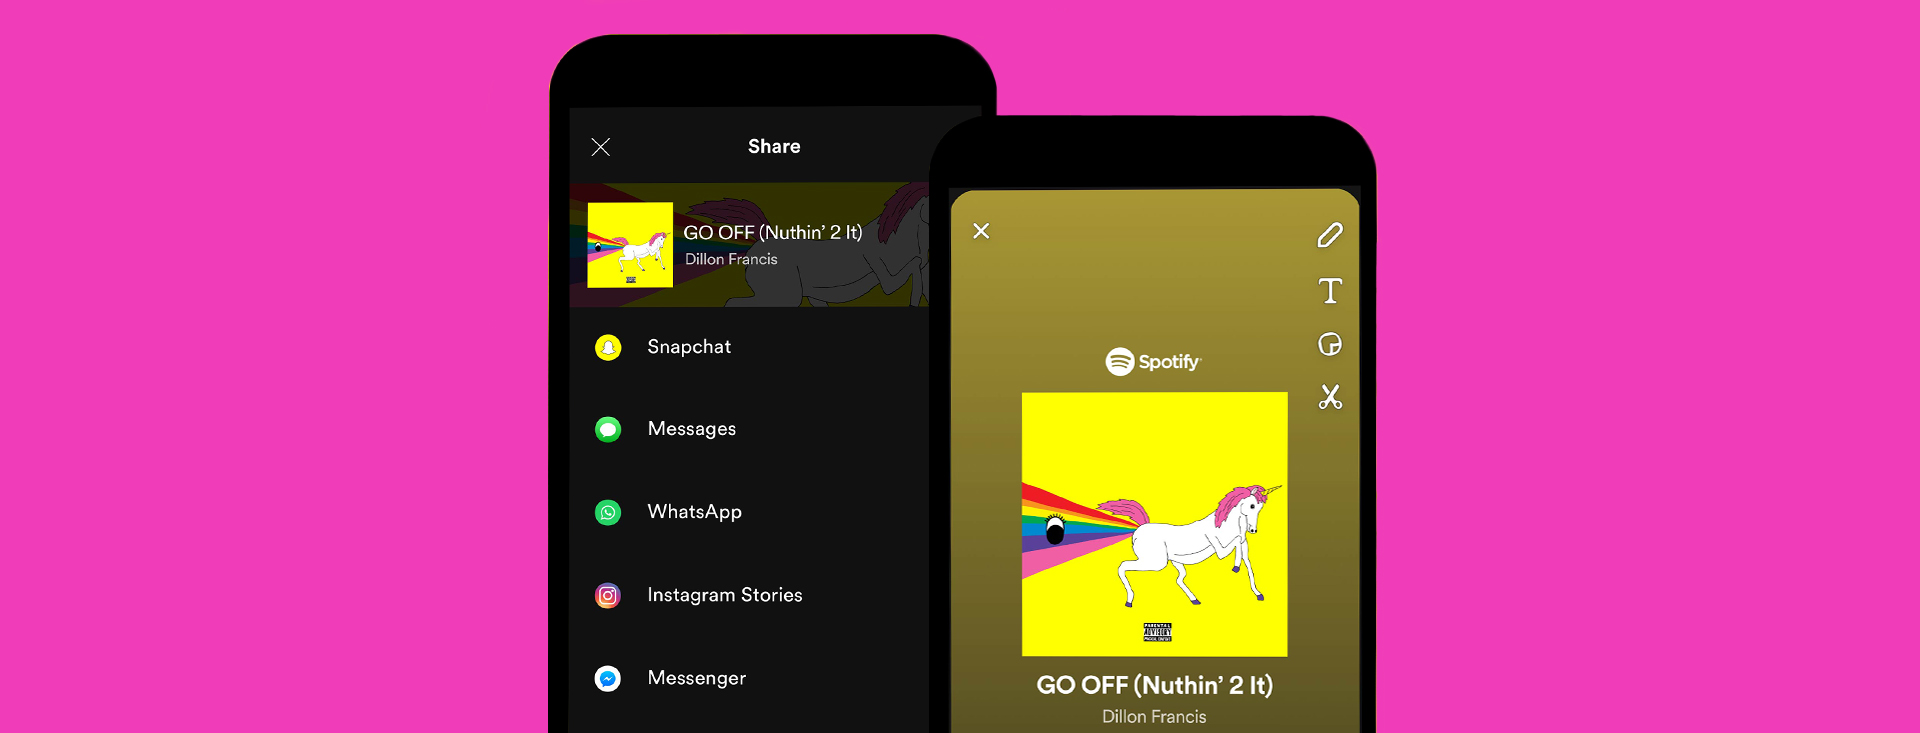 Can you download spotify songs to android app